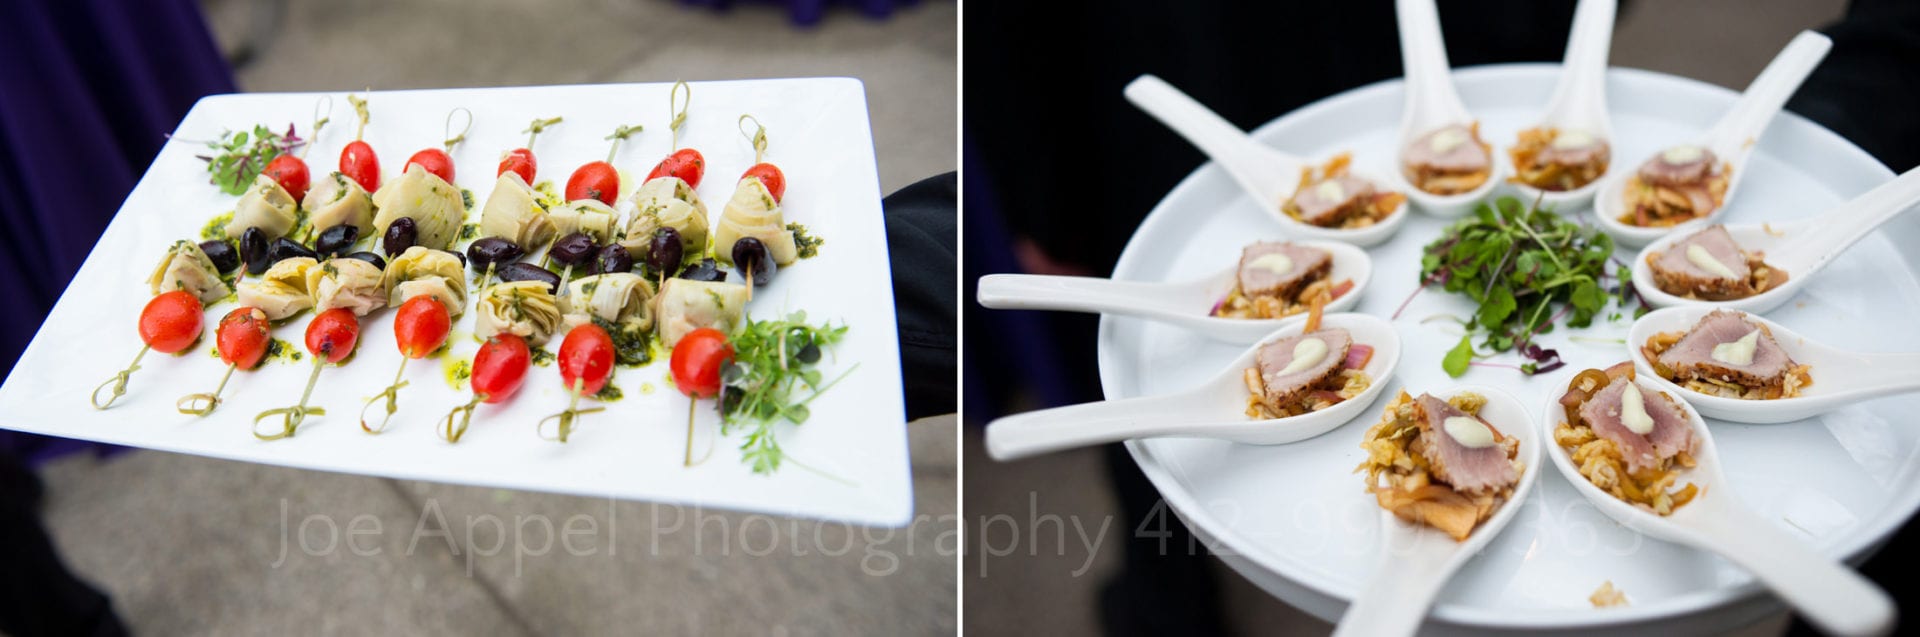 plates of vegetable and meat appetizers Phipps Conservatory Weddings